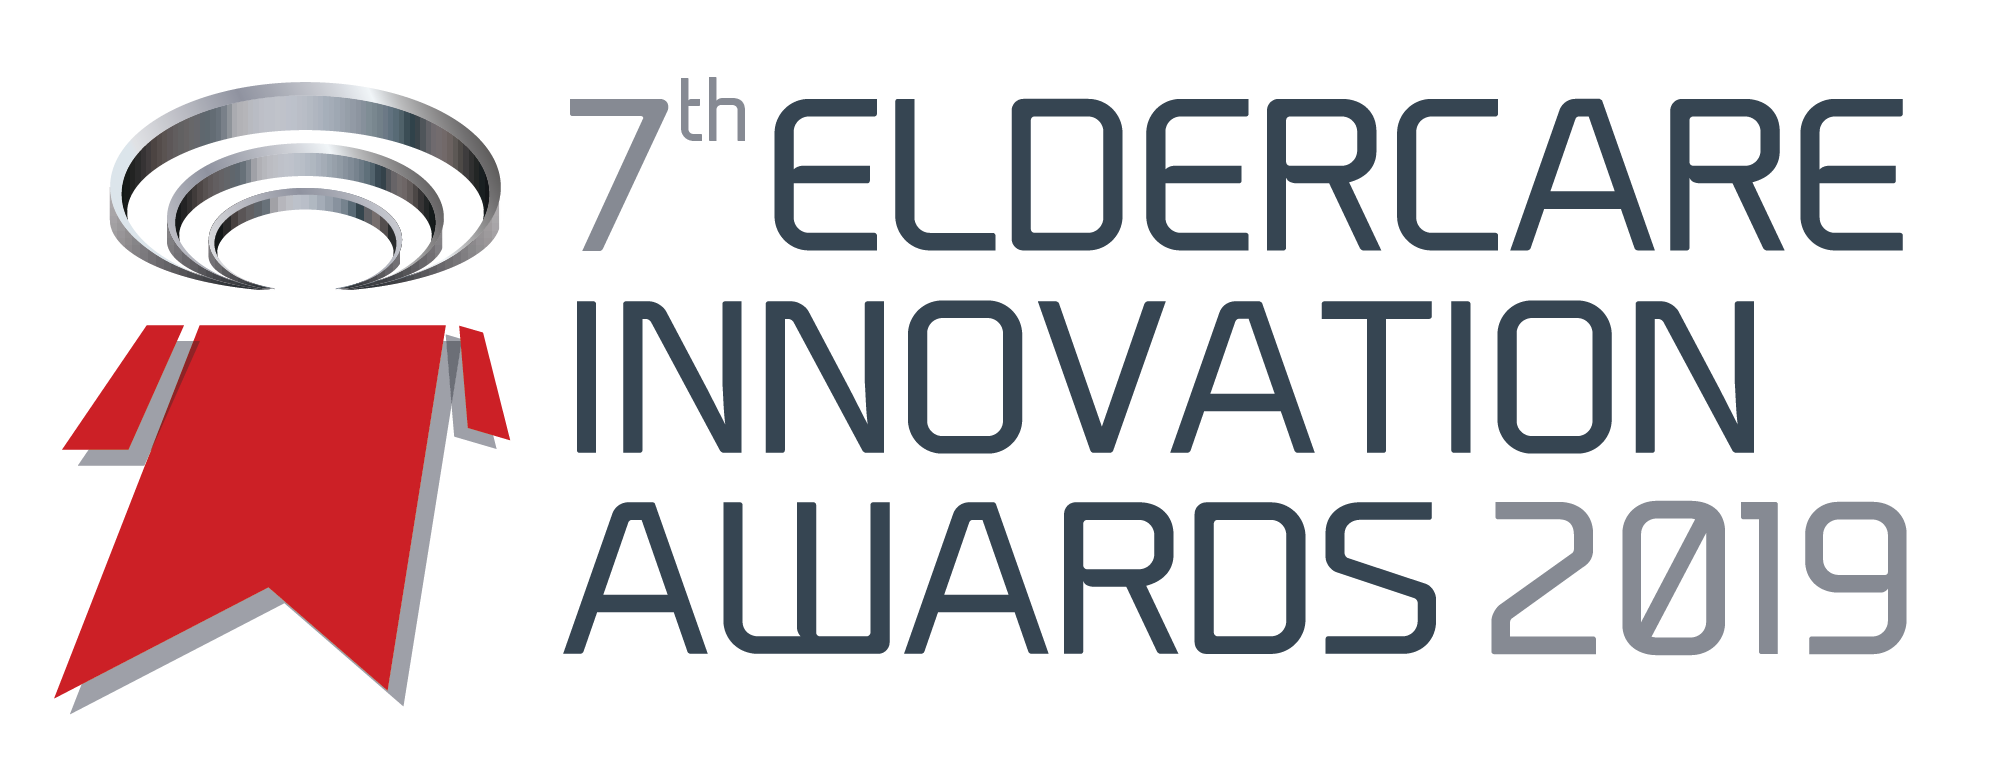 7th Asia Pacific Eldercare Innovation Awards 2019 - Finalists